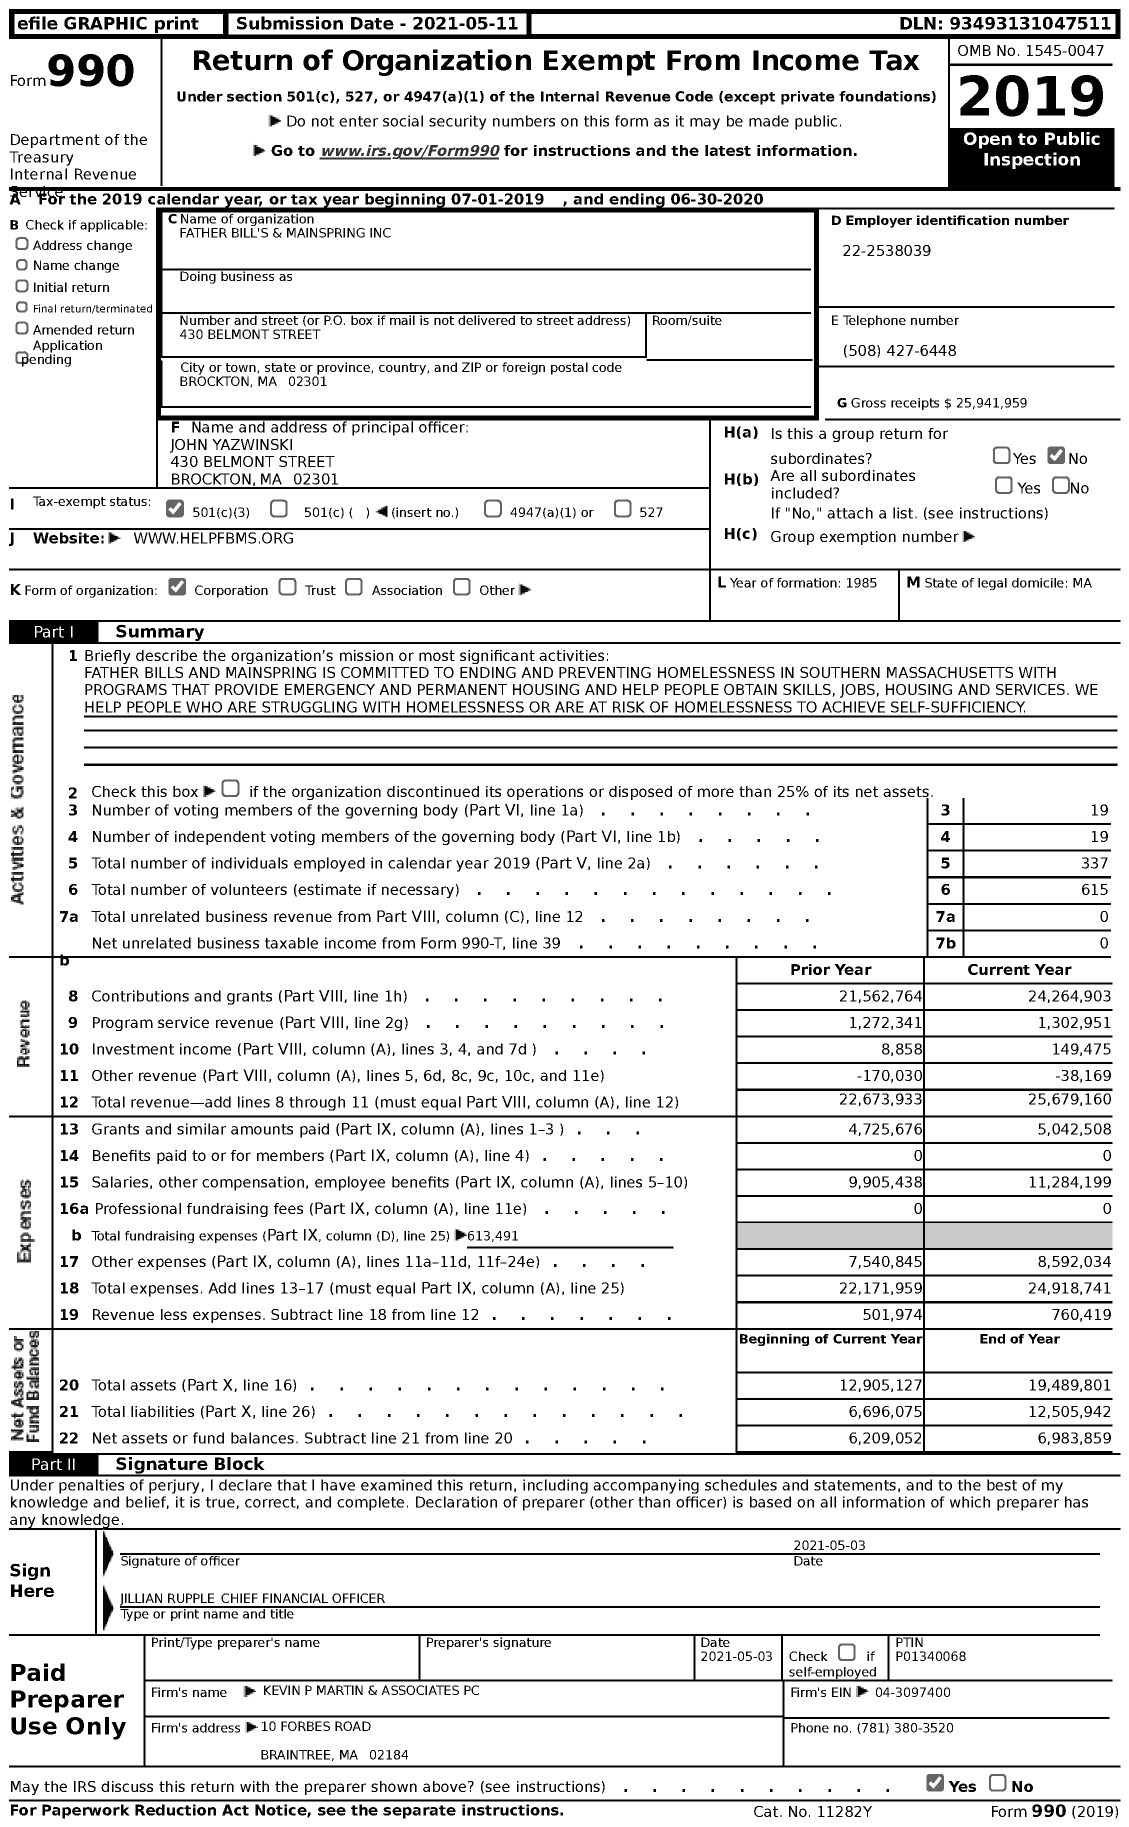 Image of first page of 2019 Form 990 for Father Bills & MainSpring (FBMS)